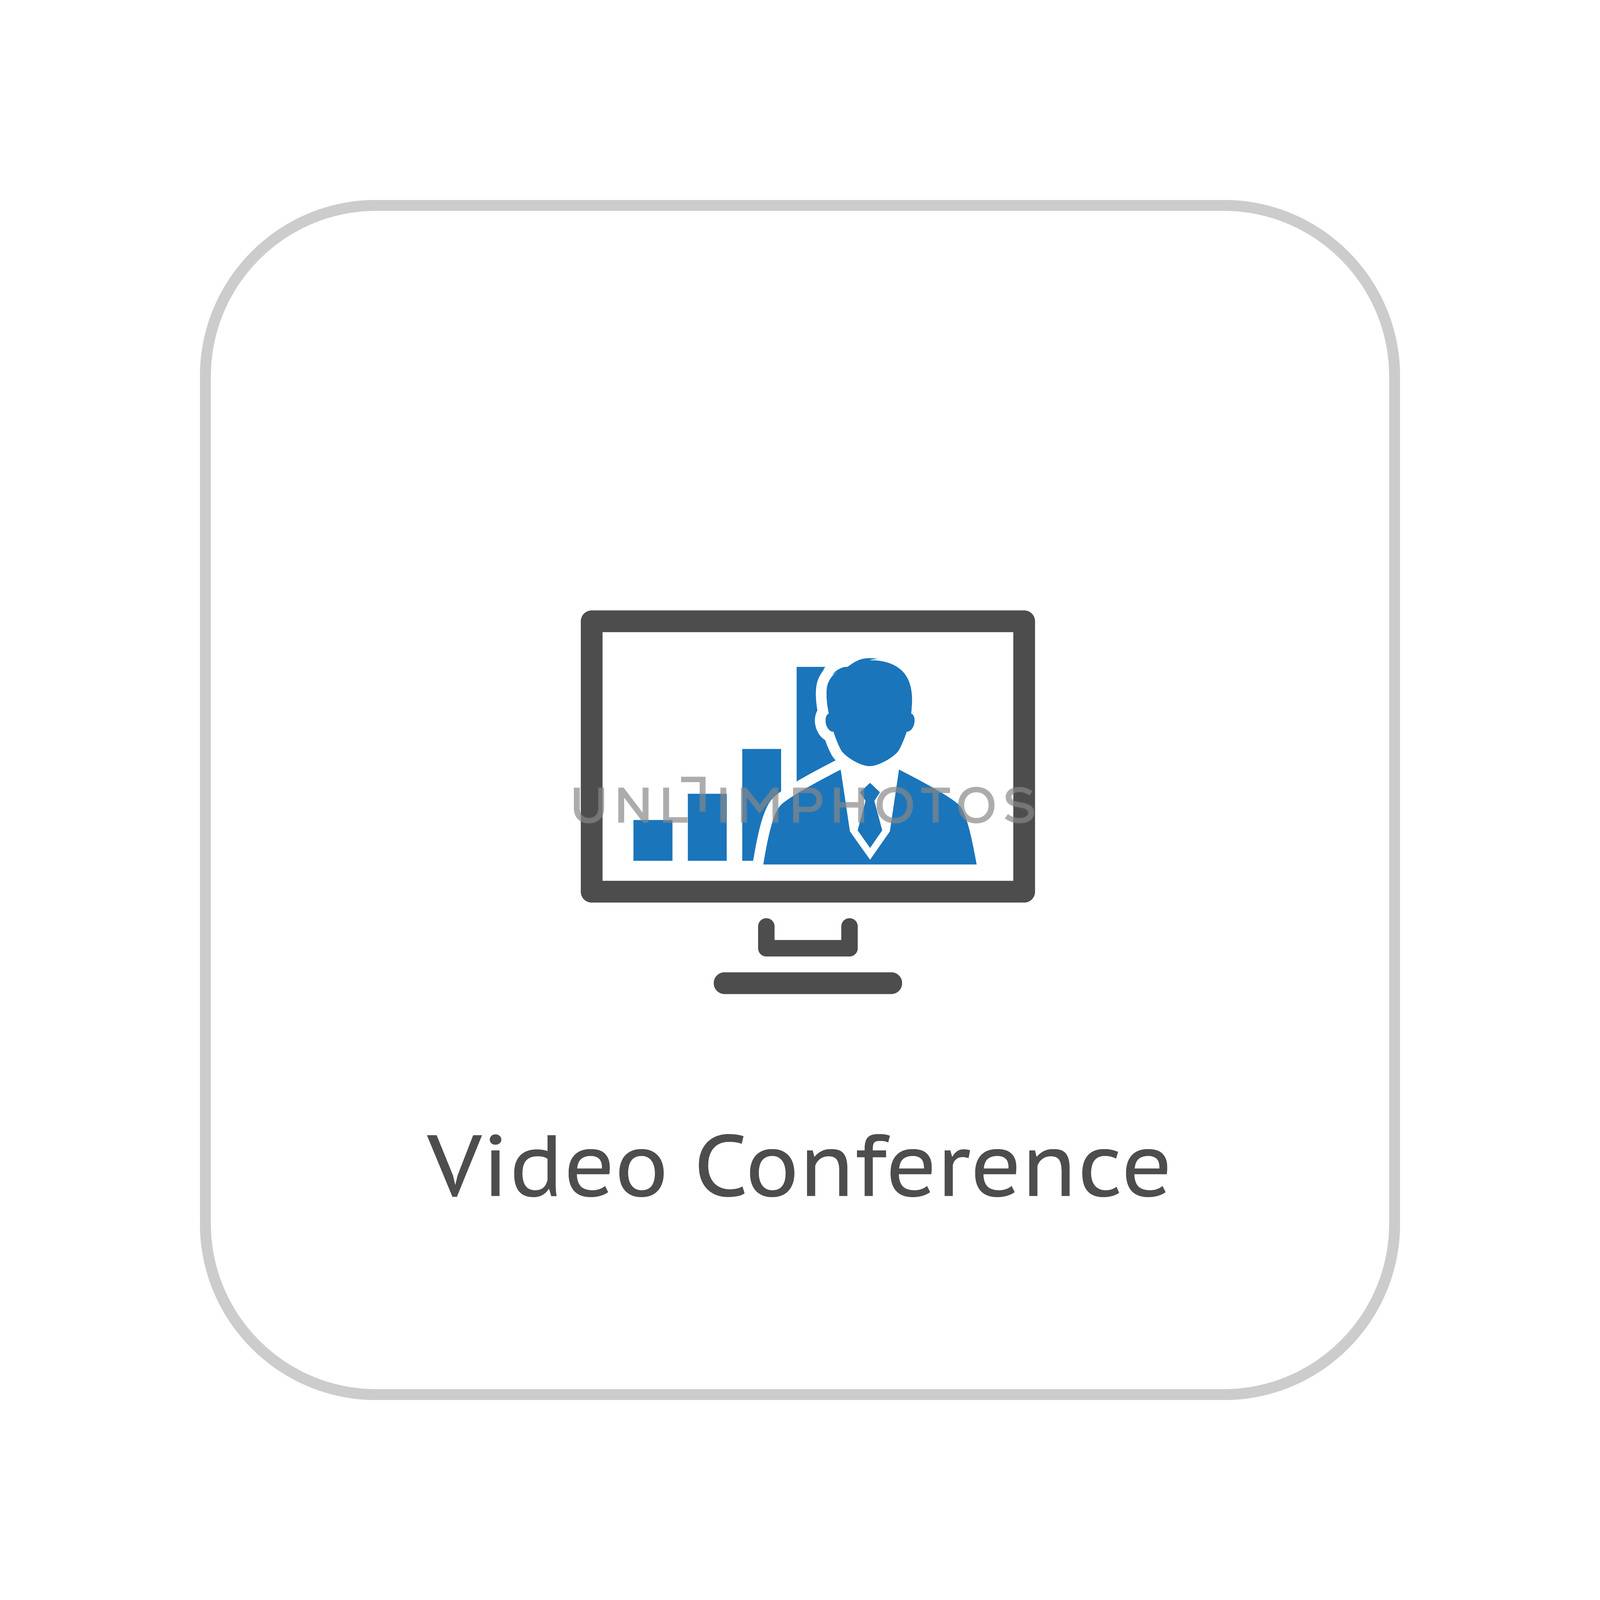 Video Conference Icon. Business Concept. Flat Design. Isolated Illustration.